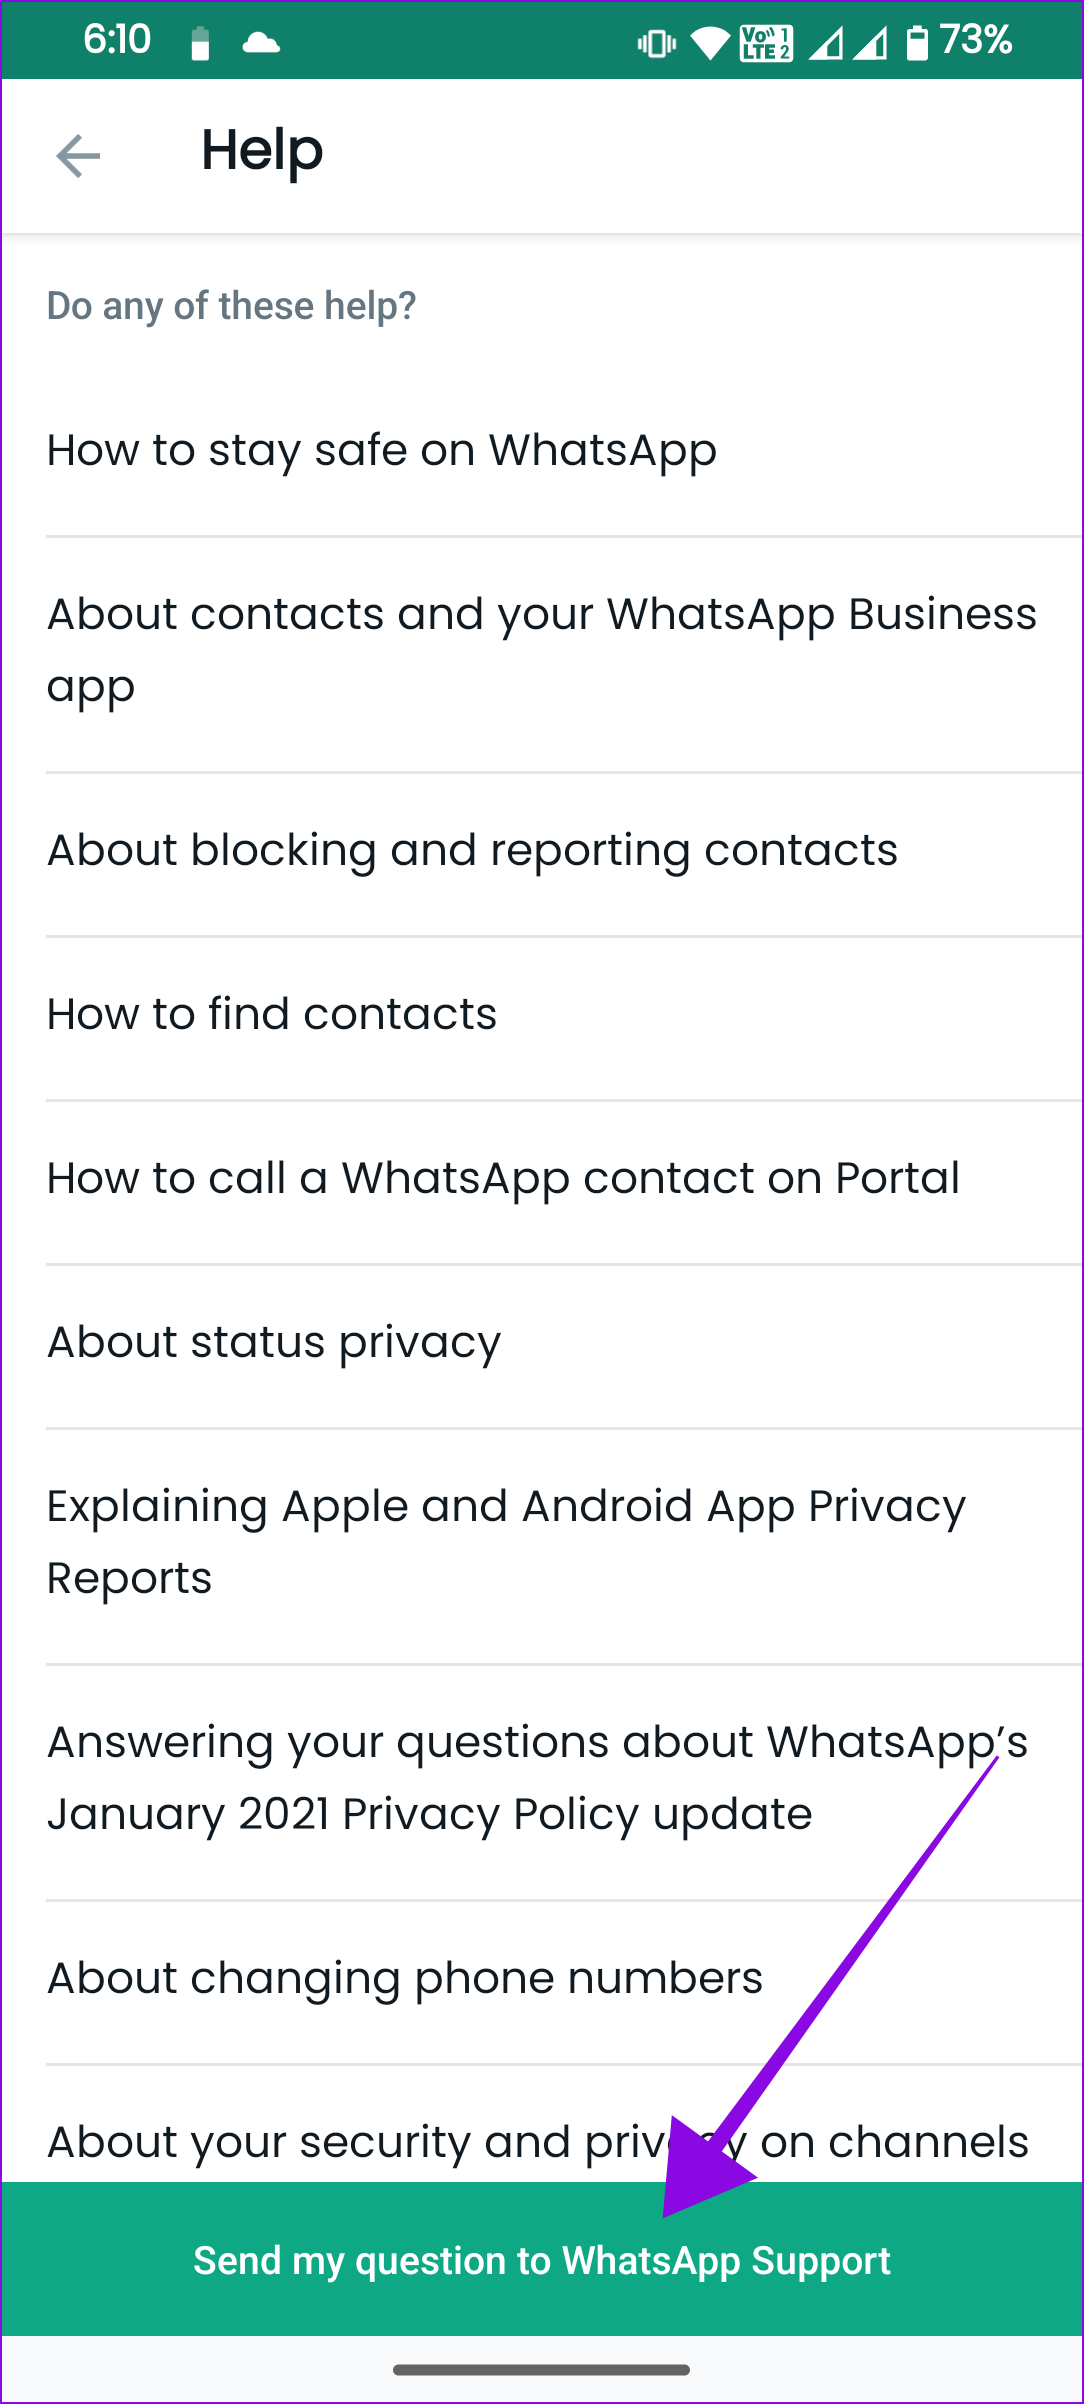 choose send my question to WhatsApp Support